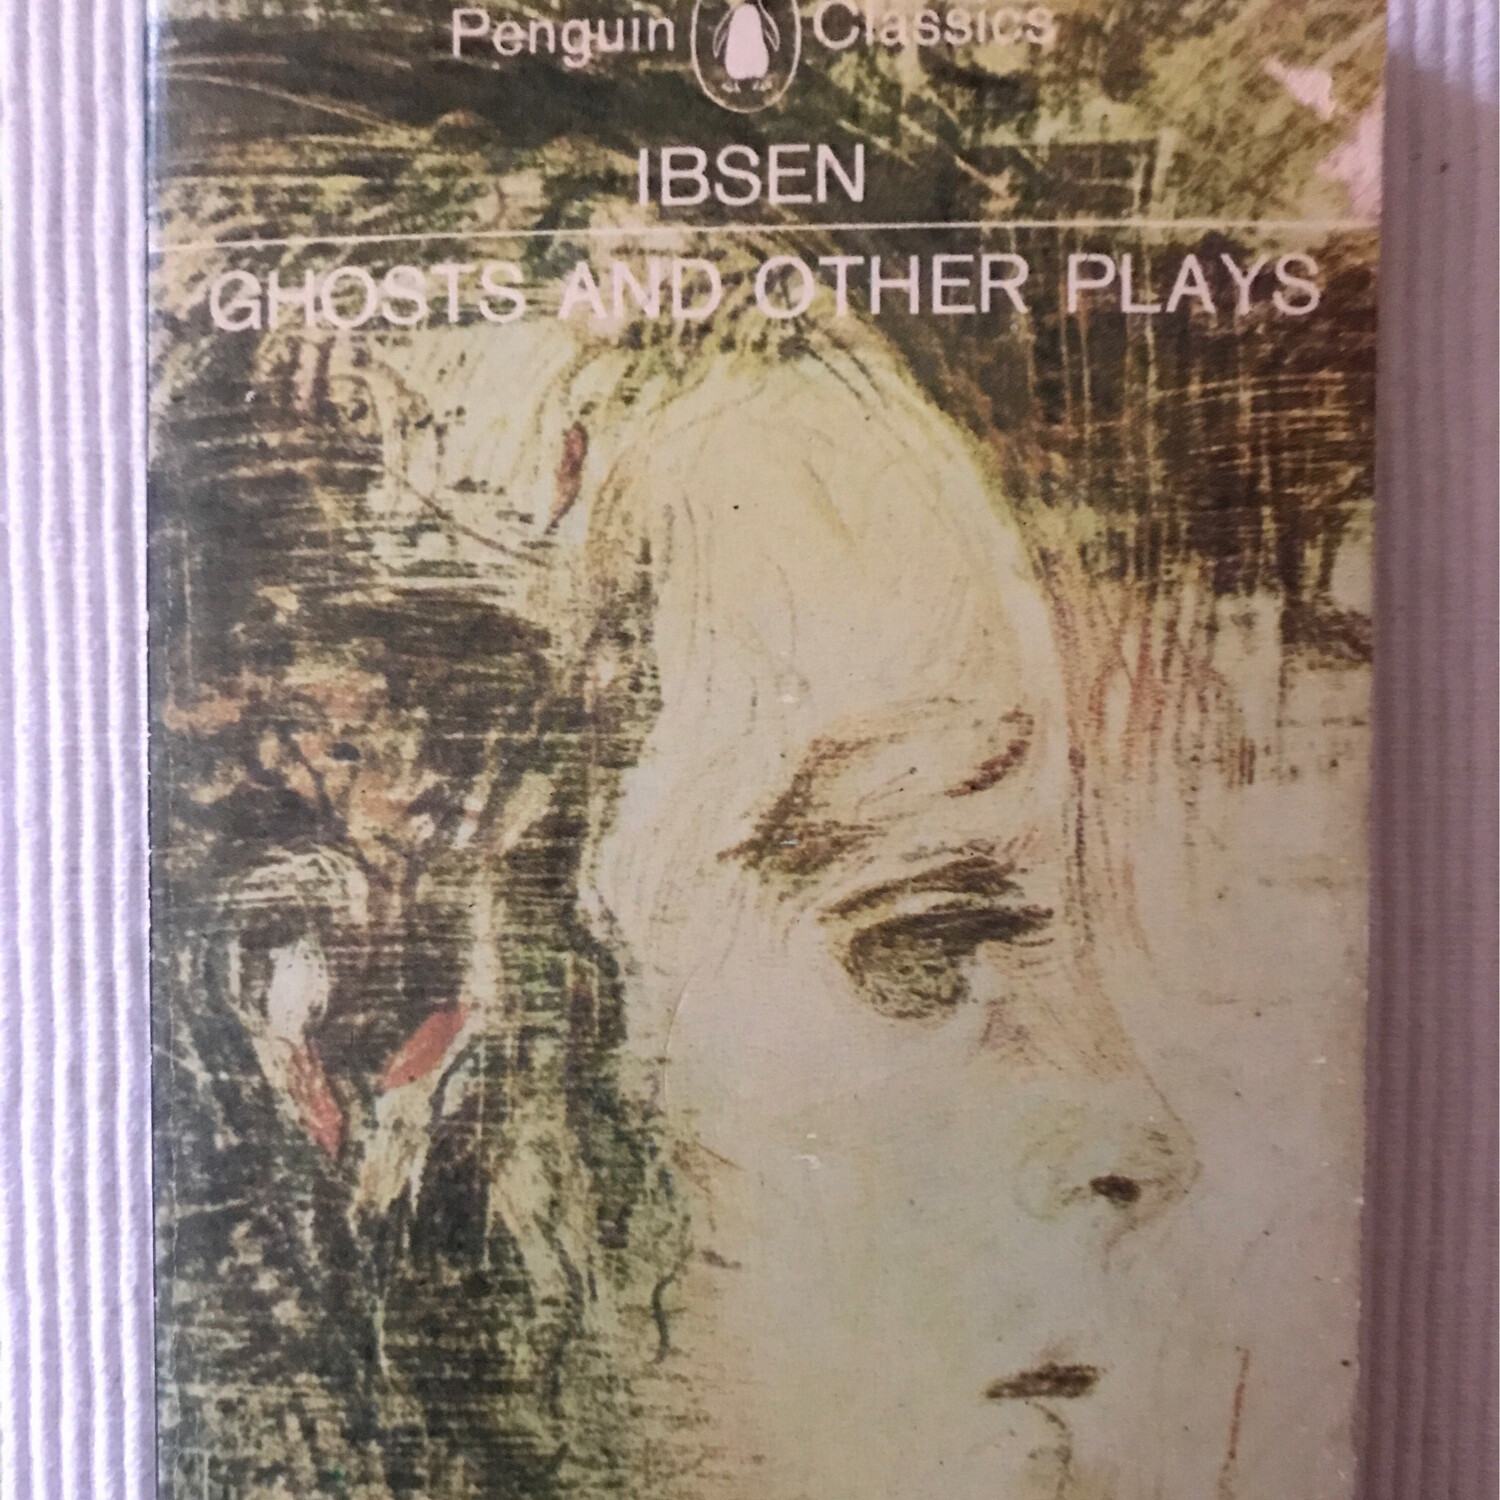 Ghosts And Other Plays, Henrik Ibsen